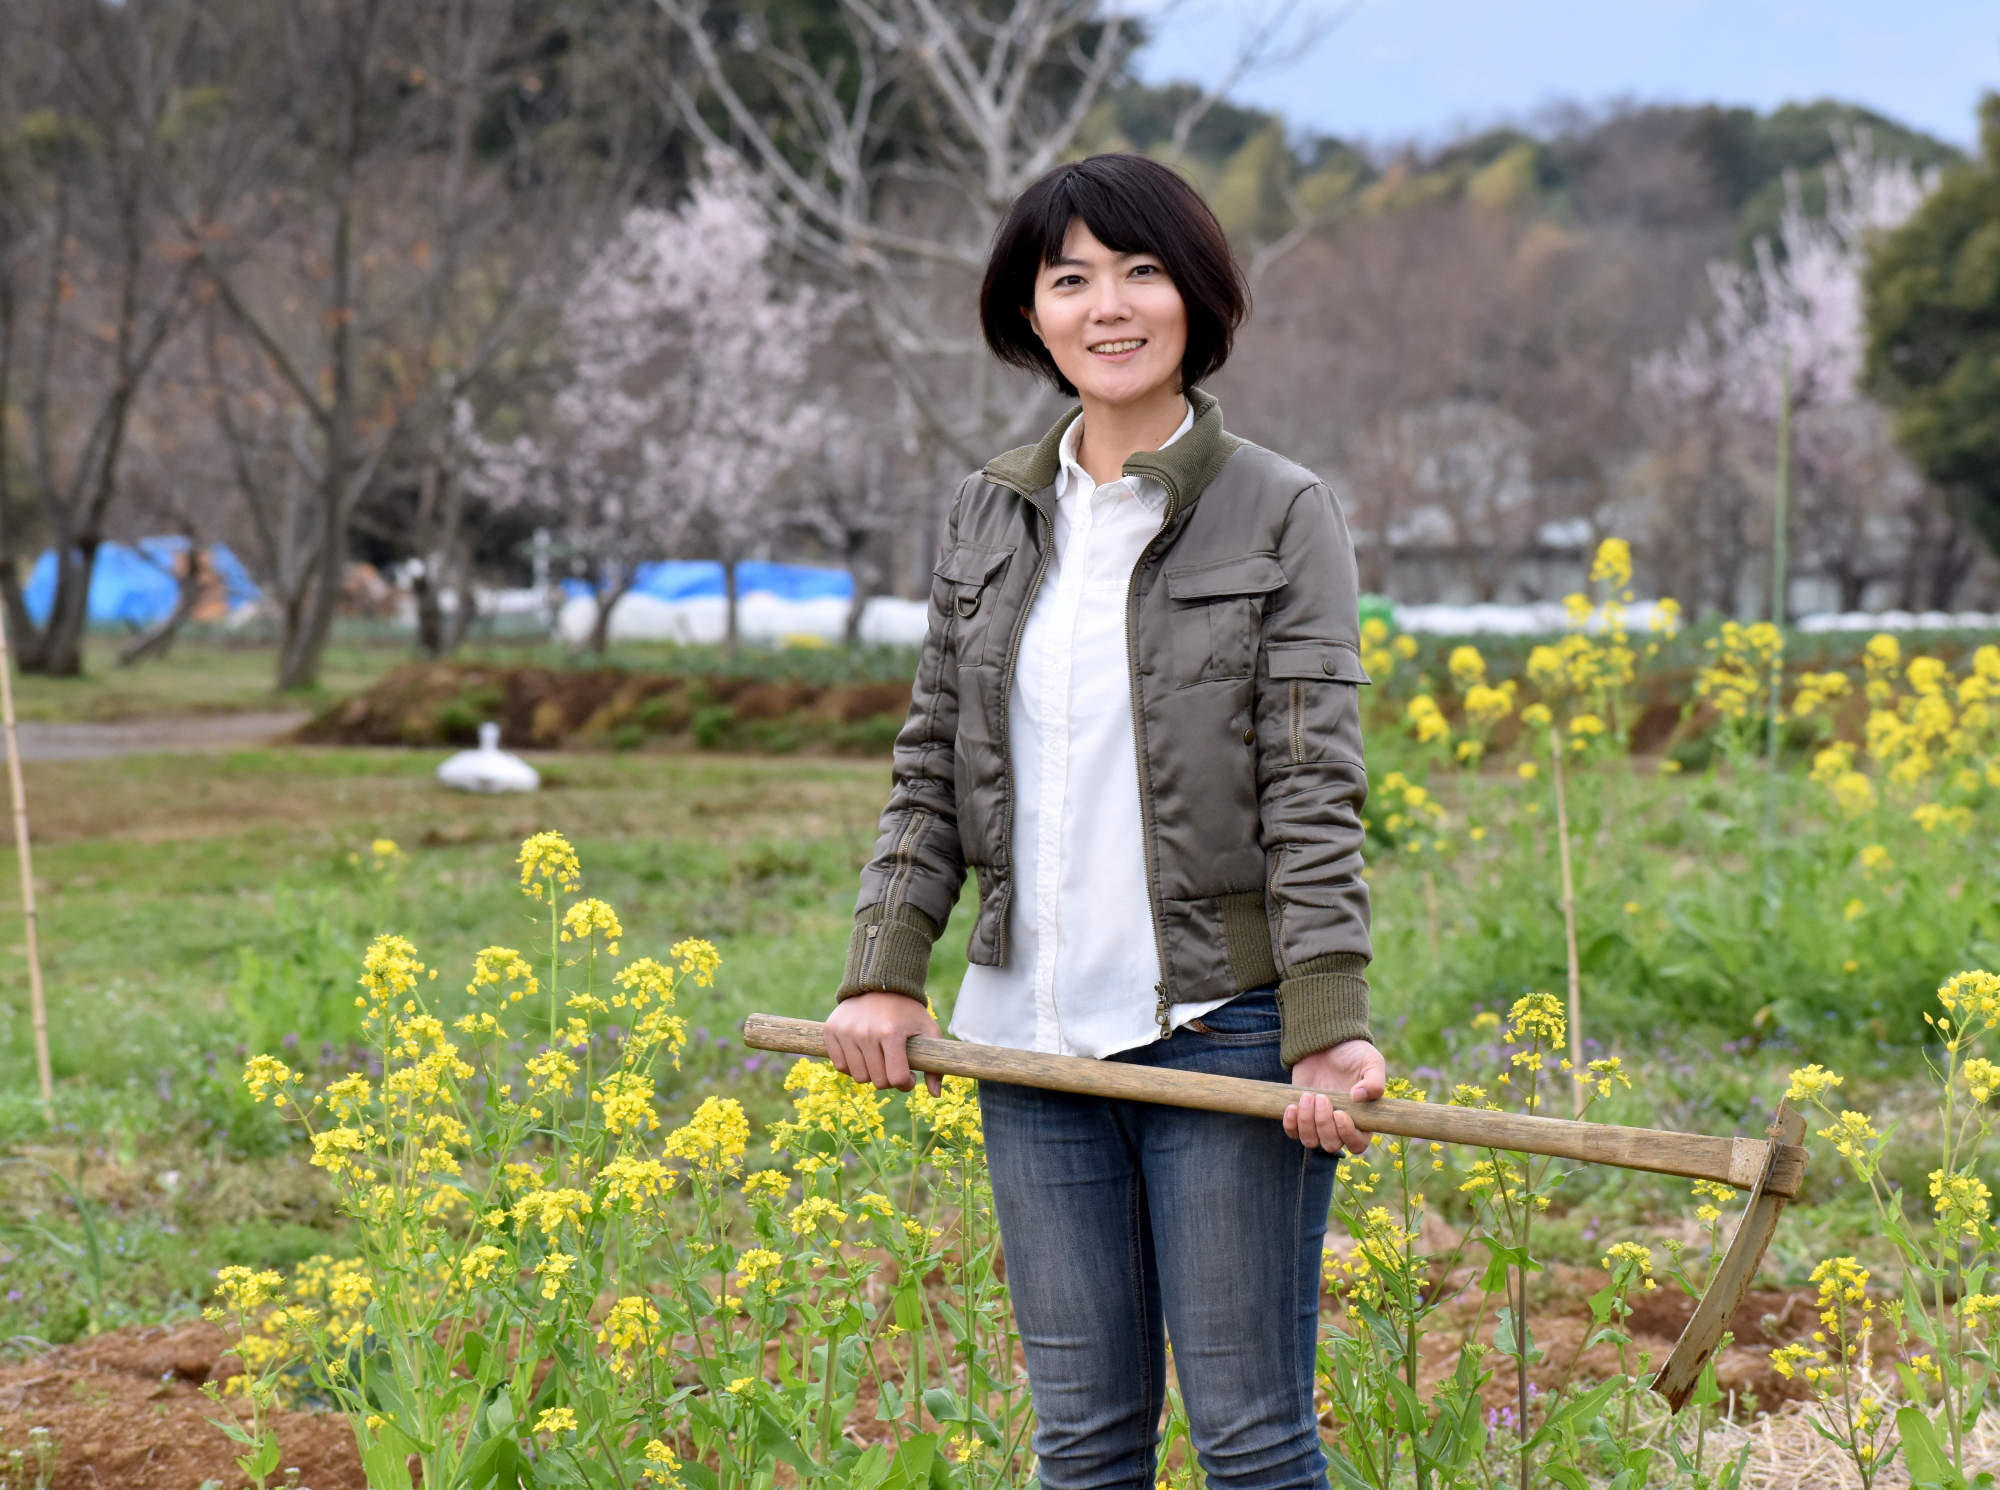 Kiyoko Ojima, who helps homeless and other needy people by giving them opportunities to work in agriculture, is seen at her field in Fujisawa, Kanagawa Prefecture, on March 19. | SATOKO KAWASAKI .